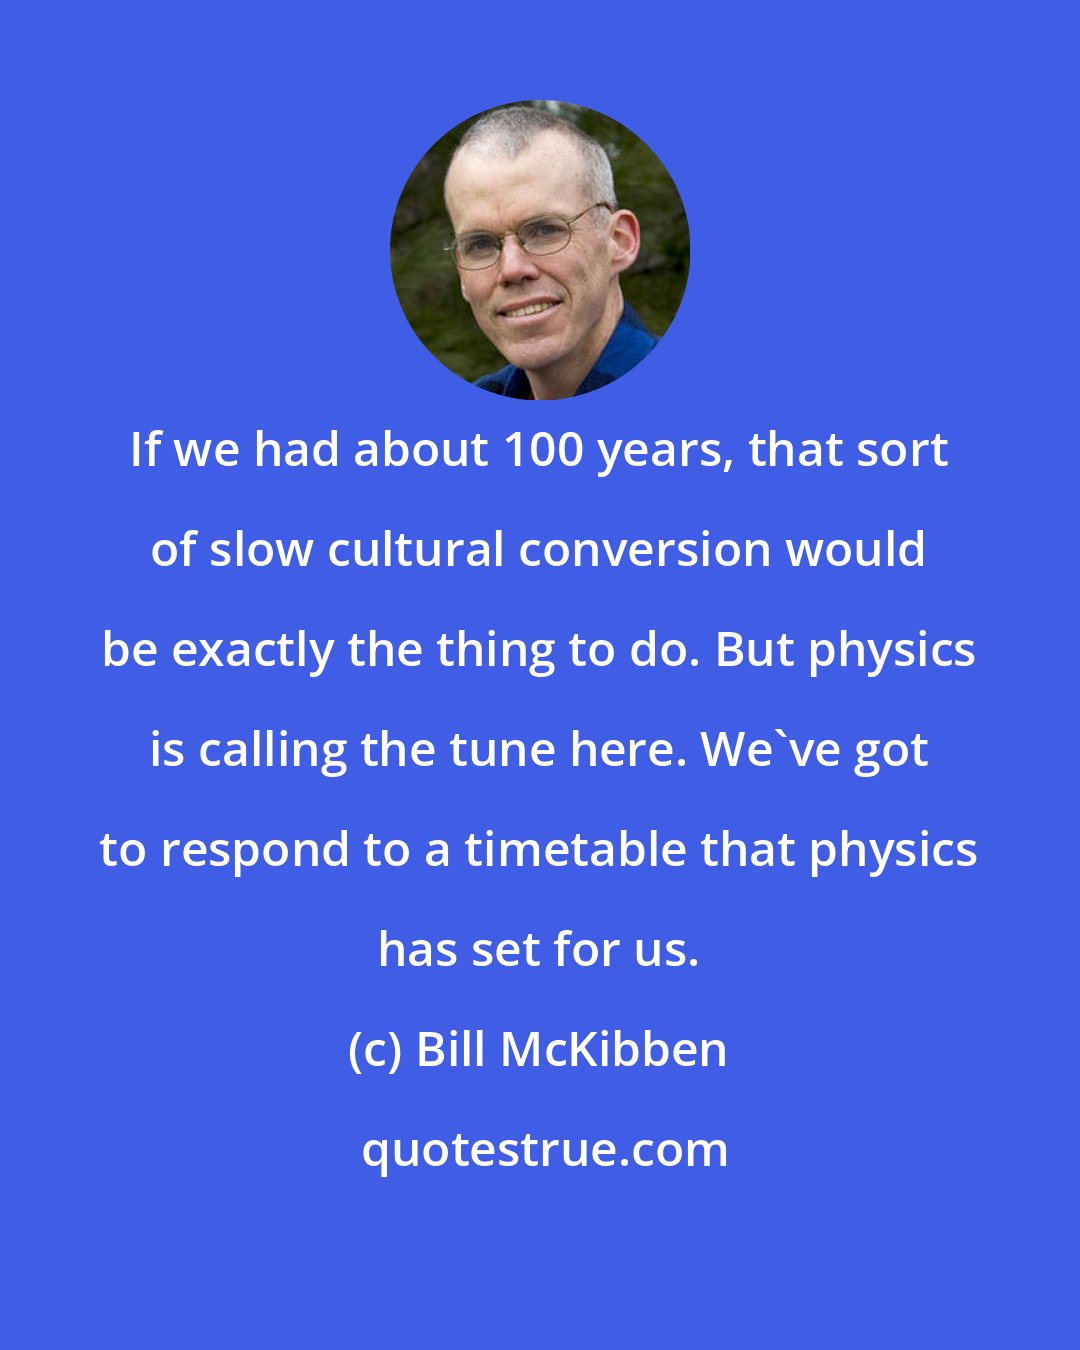 Bill McKibben: If we had about 100 years, that sort of slow cultural conversion would be exactly the thing to do. But physics is calling the tune here. We've got to respond to a timetable that physics has set for us.